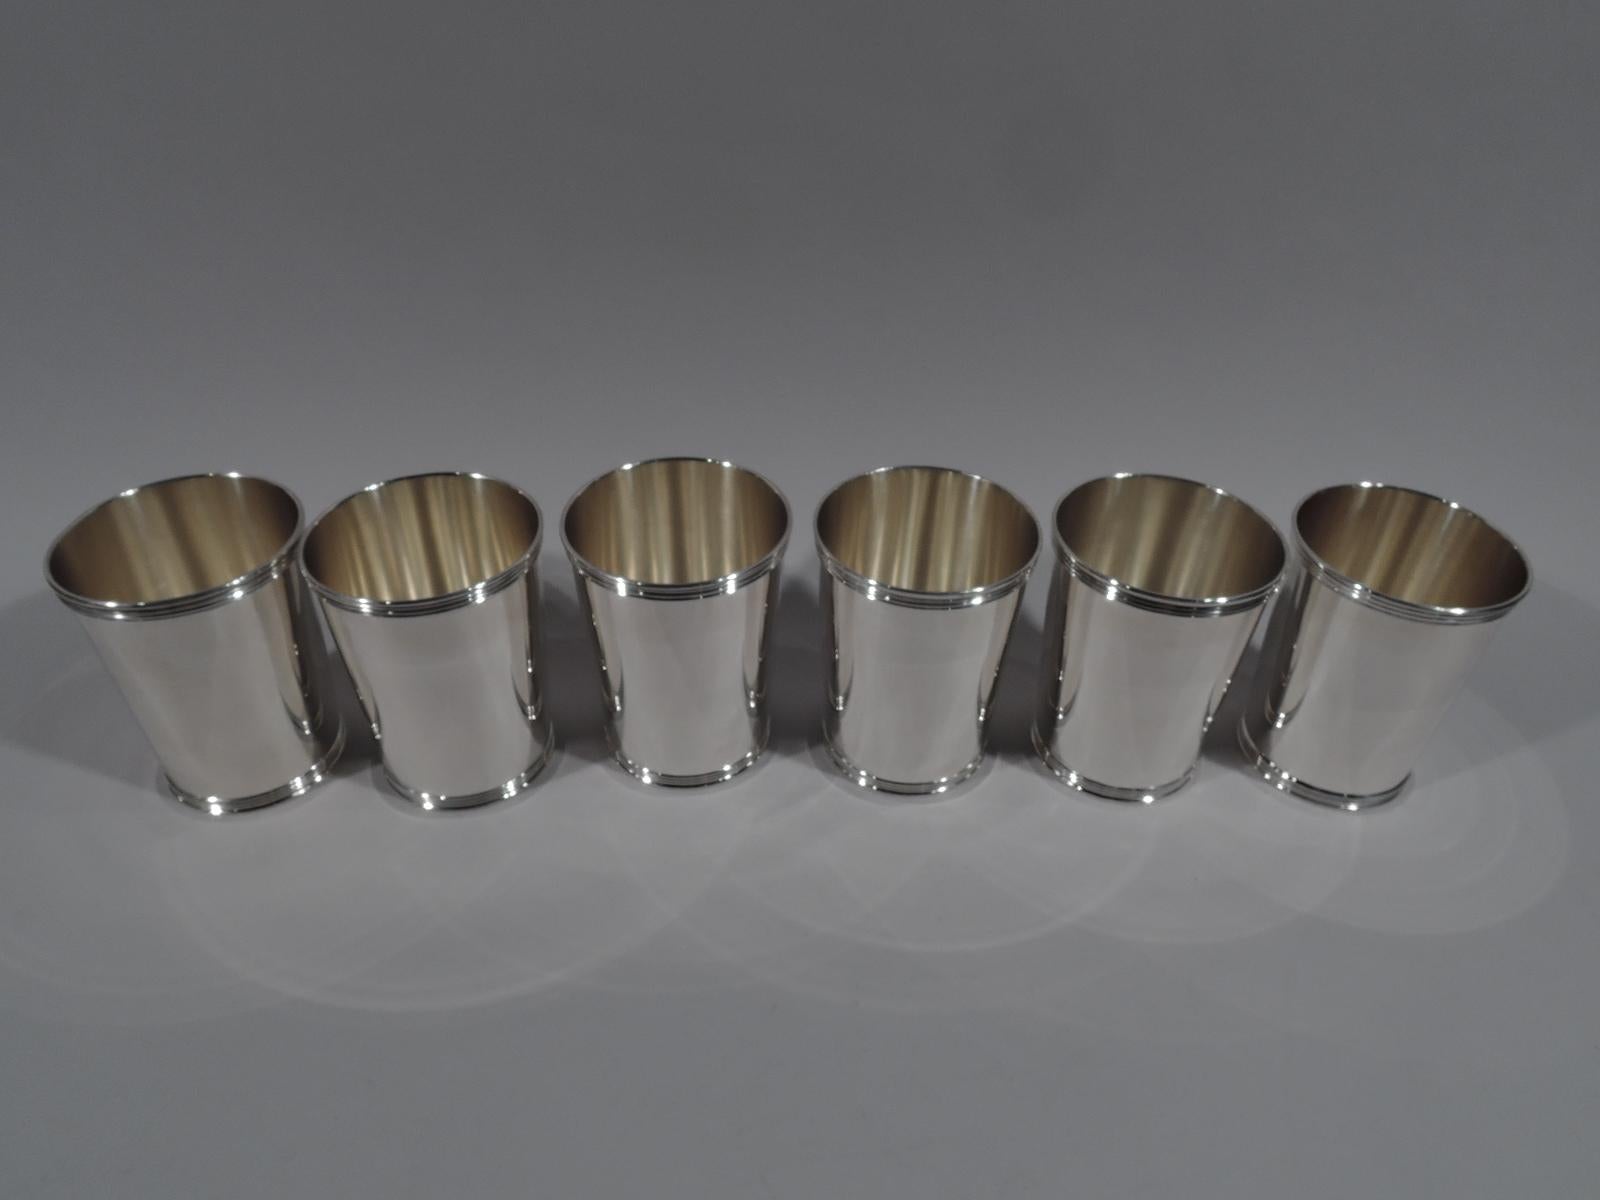 Set of 6 sterling silver mint julep cups. Made by Manchester in Providence. Each: Straight and tapering sides, and reeded rim and base. A greater starter set or addition to the family collection. Fully marked and numbered 3759S. Total weight: 26